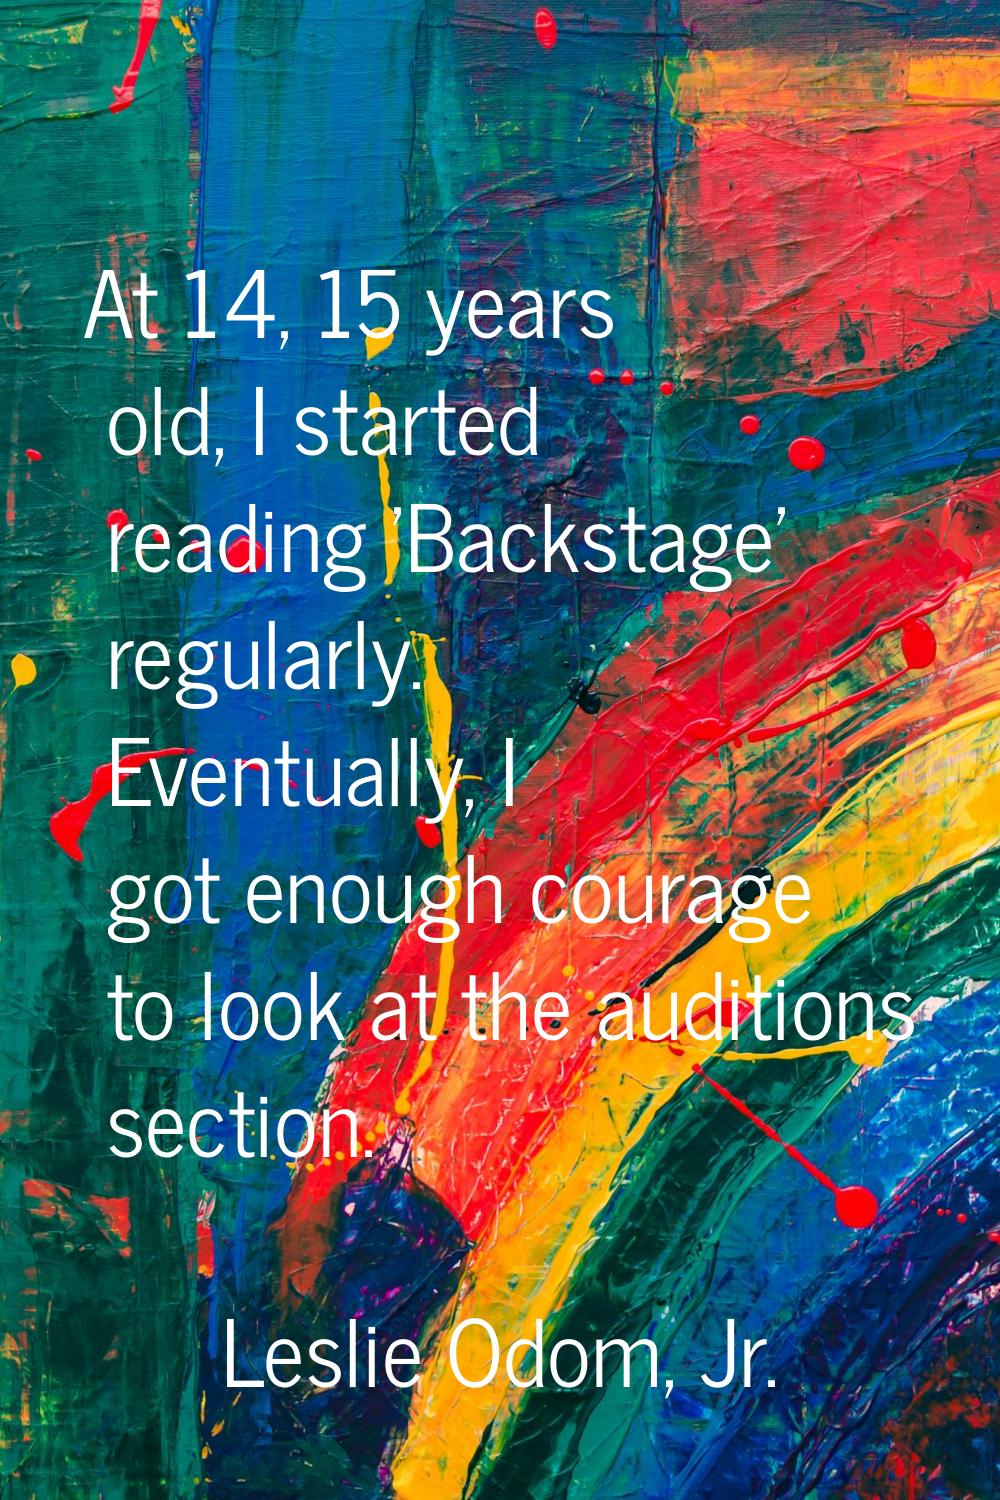 At 14, 15 years old, I started reading 'Backstage' regularly. Eventually, I got enough courage to l